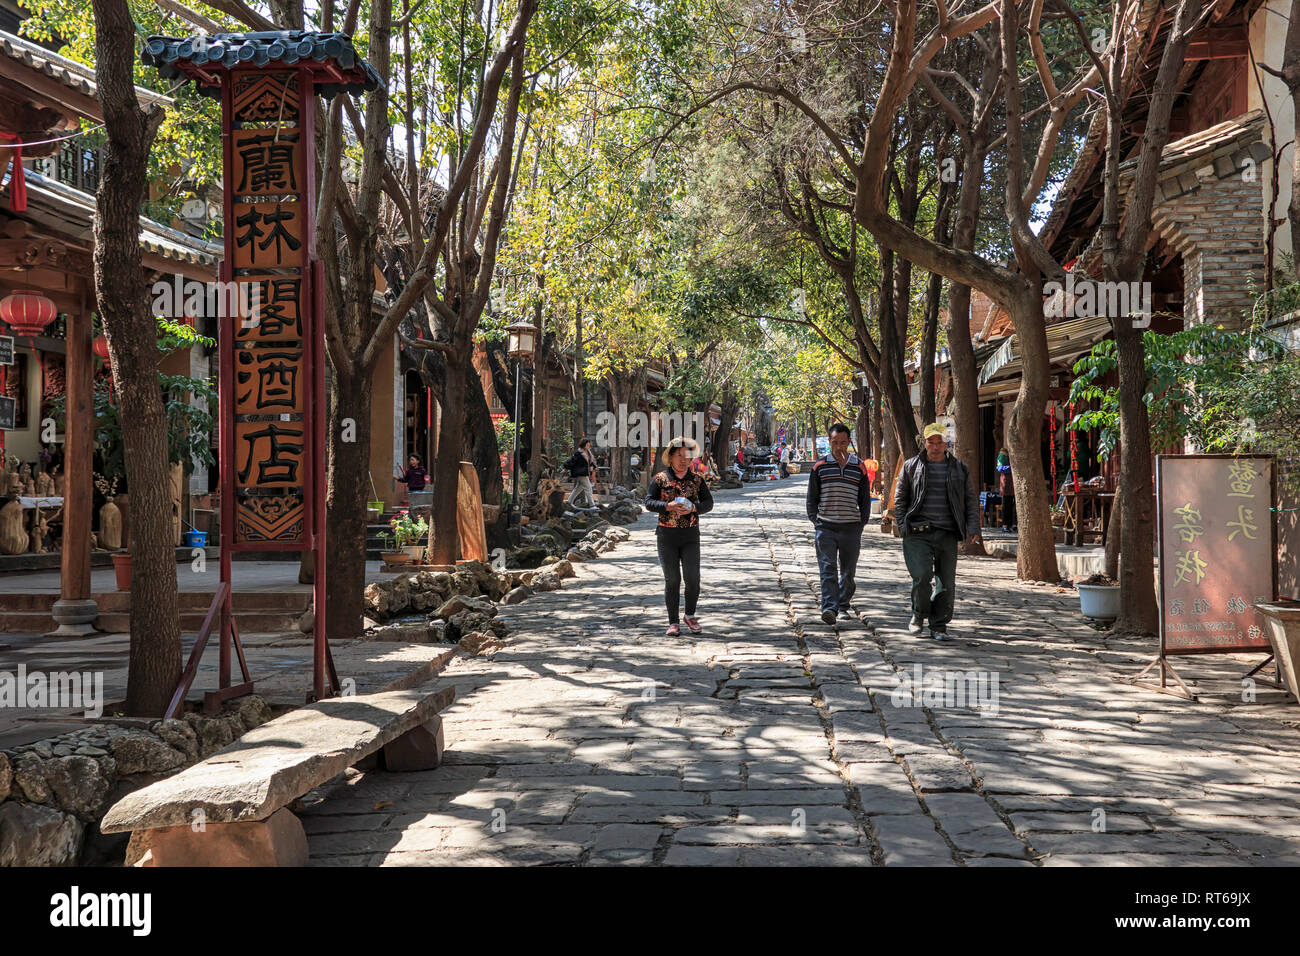 Shaxi, China - February 21, 2019: Chinese tourists walking in one of the streets of Shaxi old Town along the ancient Tea Horse Road (South Silk Road) Stock Photo